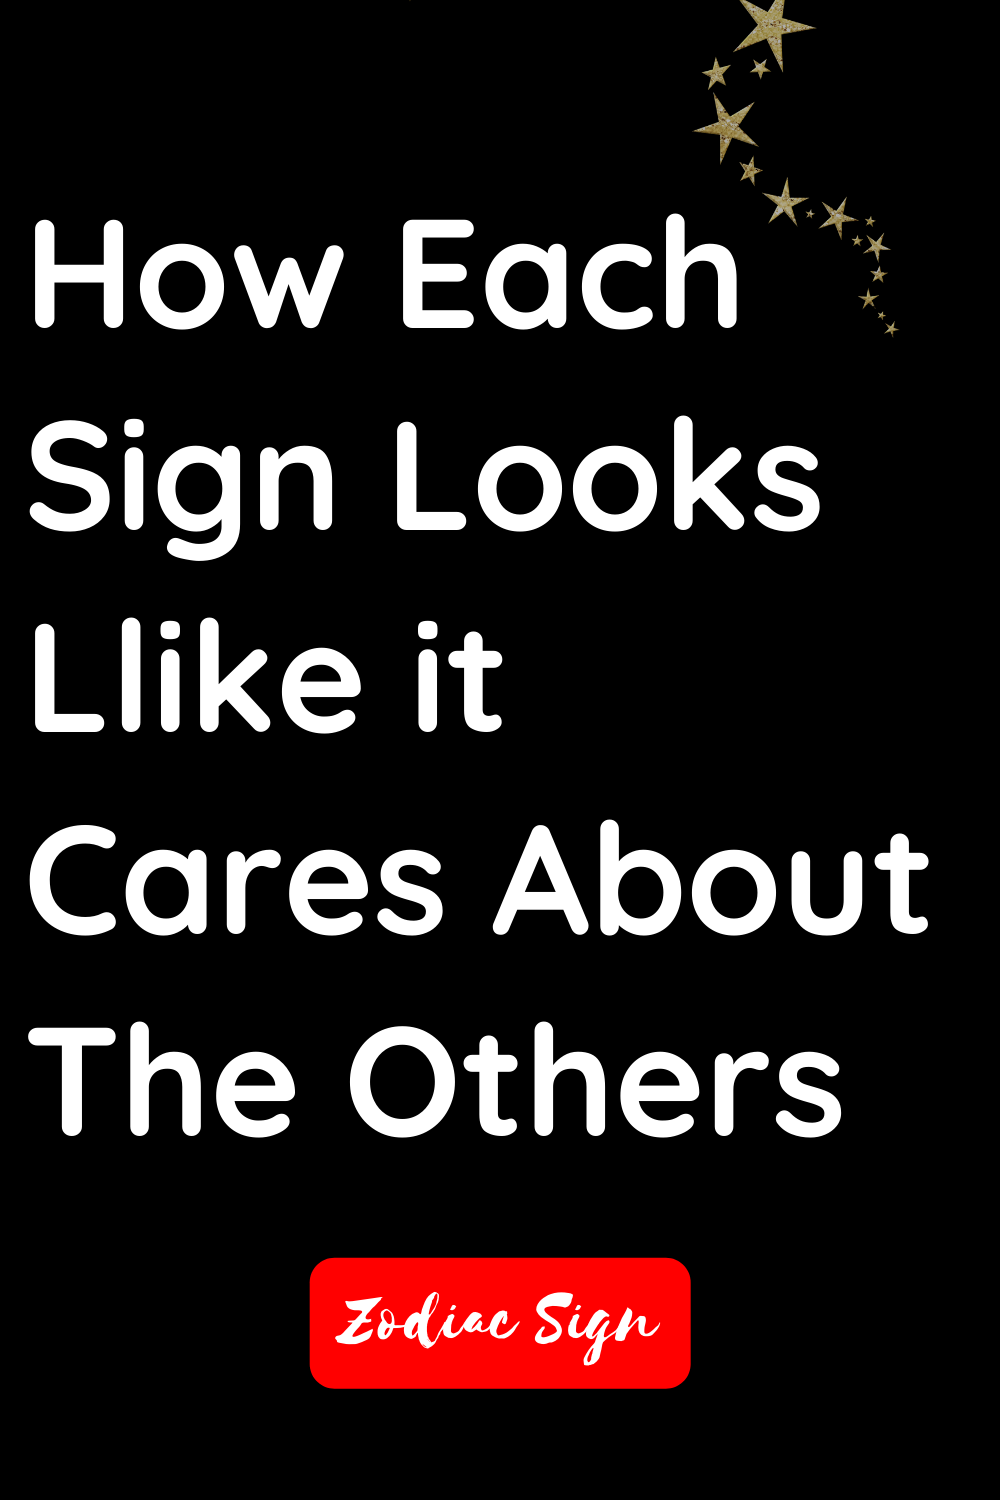 How each sign looks like it cares about the others